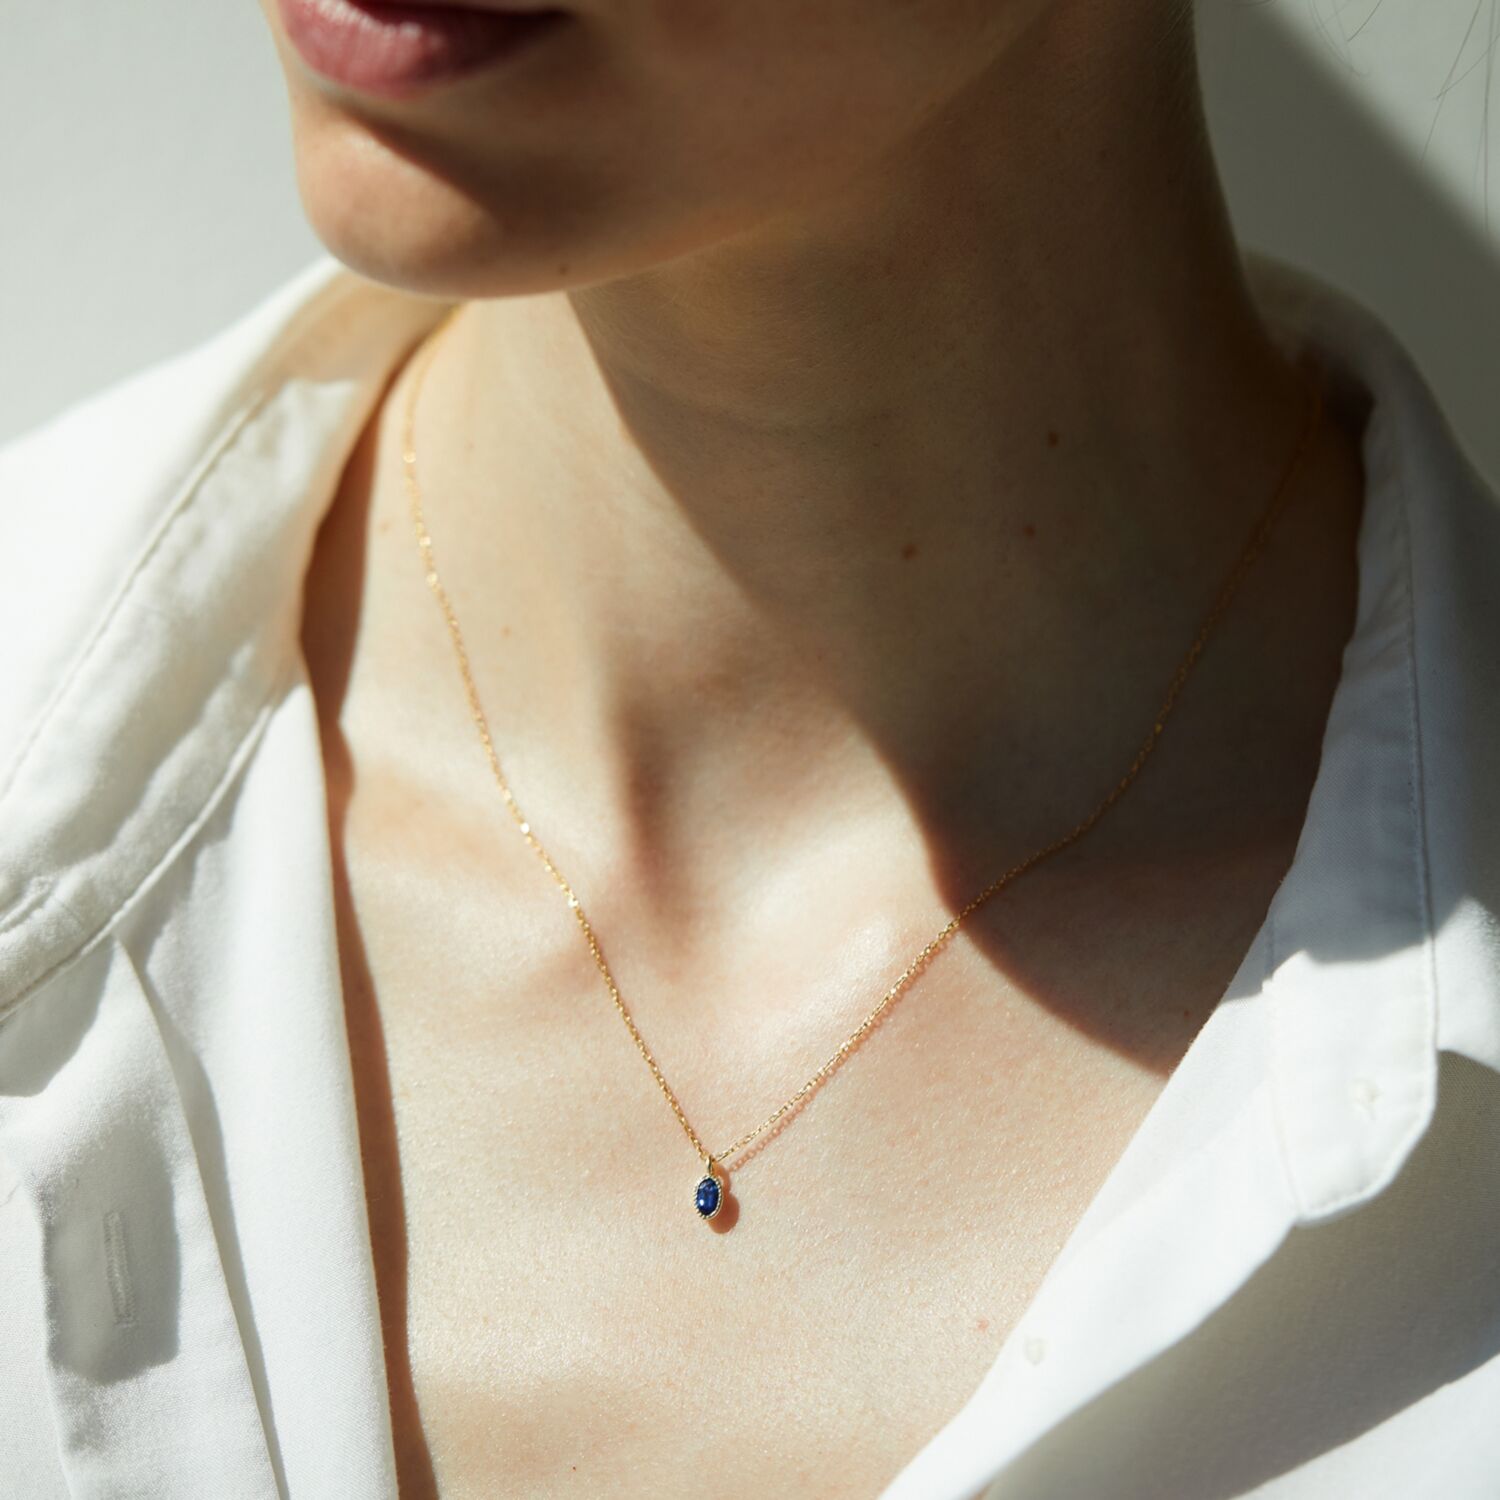 Pave Necklace choker Necklace Pave Necklace Minimal Tiny Gemstone Necklace Gift for her Simple Necklace Dainty Teardrop Necklace